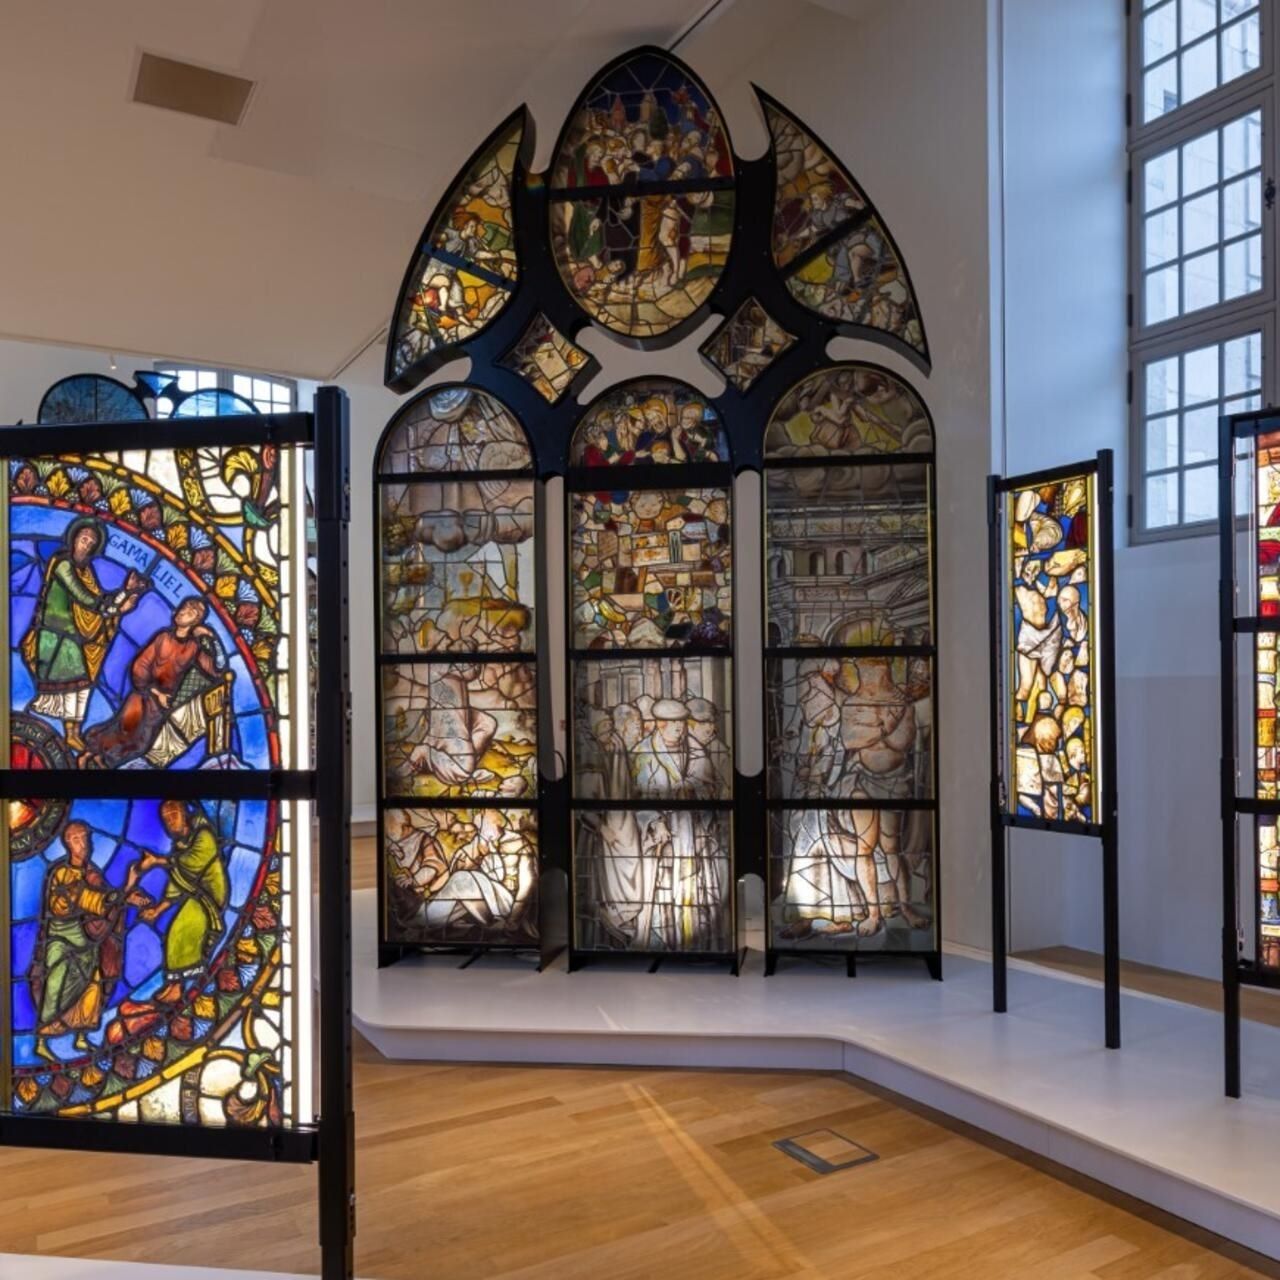 How To Display Stained Glass Without A Window